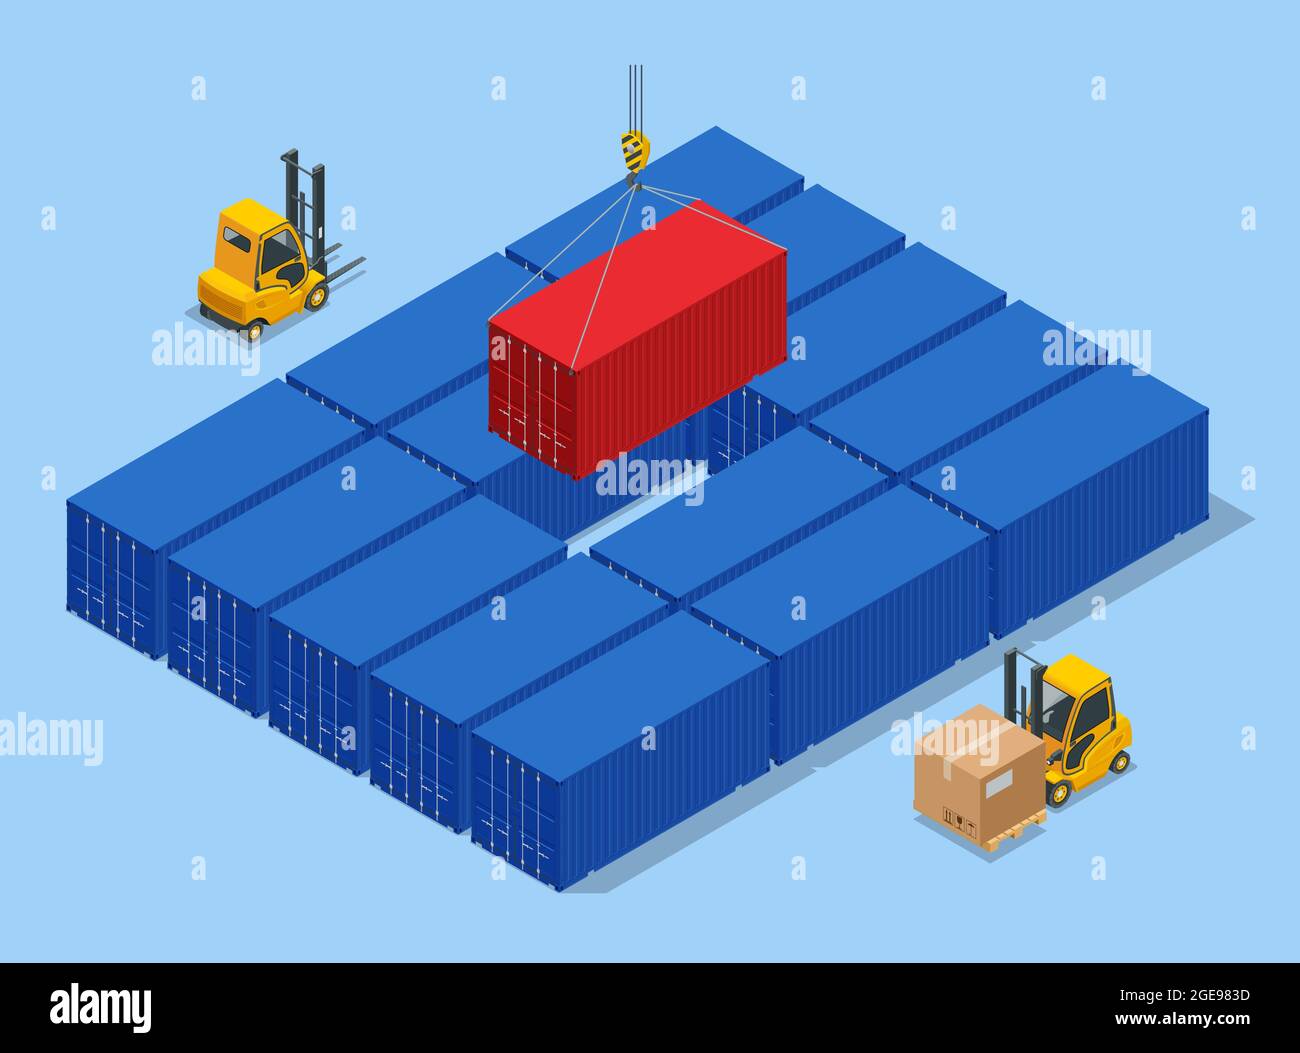 Isometric Automated Transport Vehicles Container Loading Cargo. Container Ship Loading and Unloading in Sea Port. Business Logistic Import and Export Stock Vector